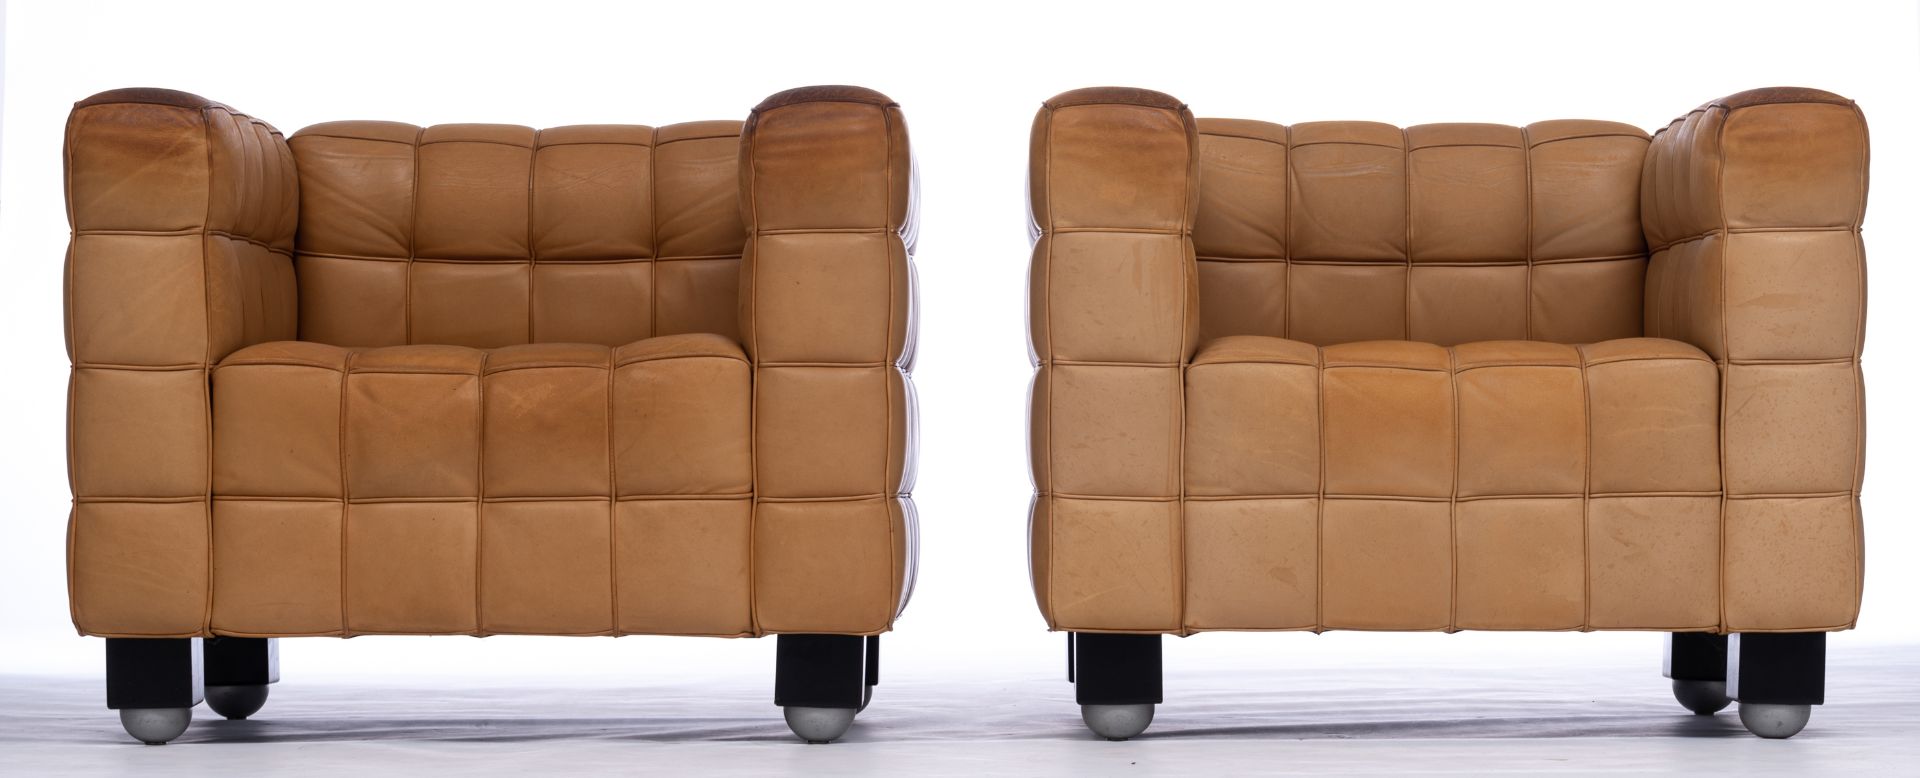 A pair of leather upholstered Kubus Armchairs, design by Josef Hoffmann for Wittmann Austria, the '8 - Bild 2 aus 9